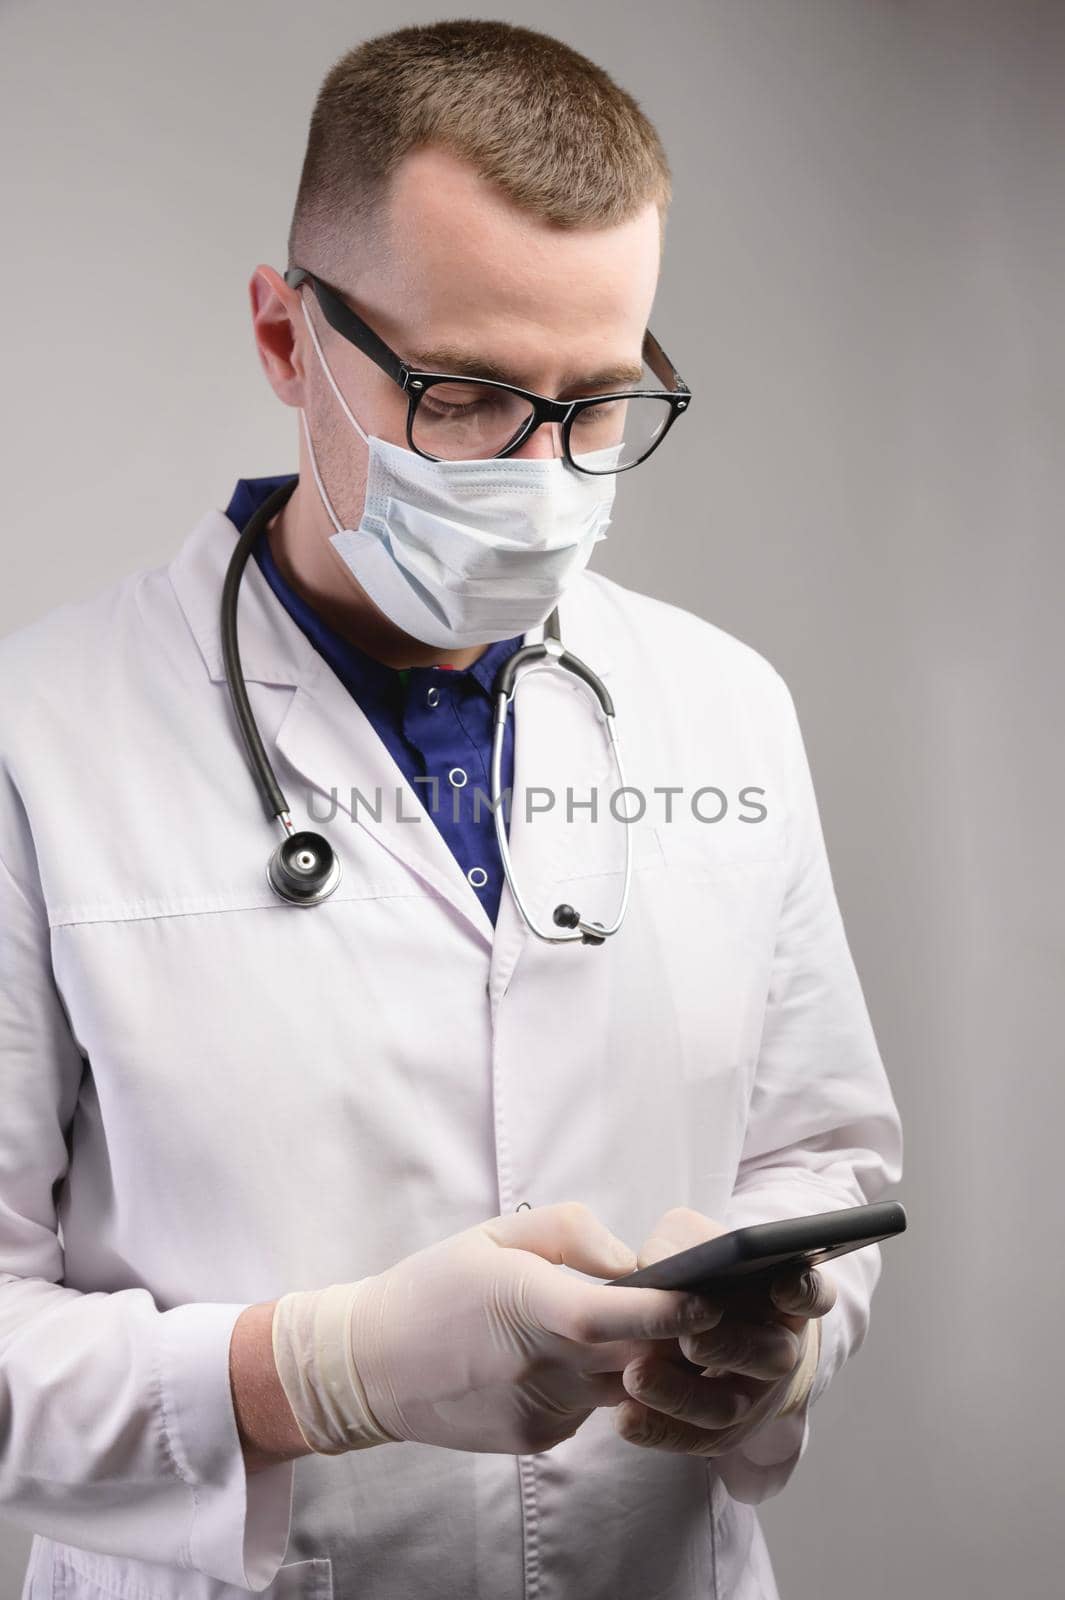 Studio portrait of a young caucasian doctor in uniform and a mask with an smartphone in his hands on a white background with copy space in the frame. Doctor intern young specialist uses an electronic tablet for medical purposes.